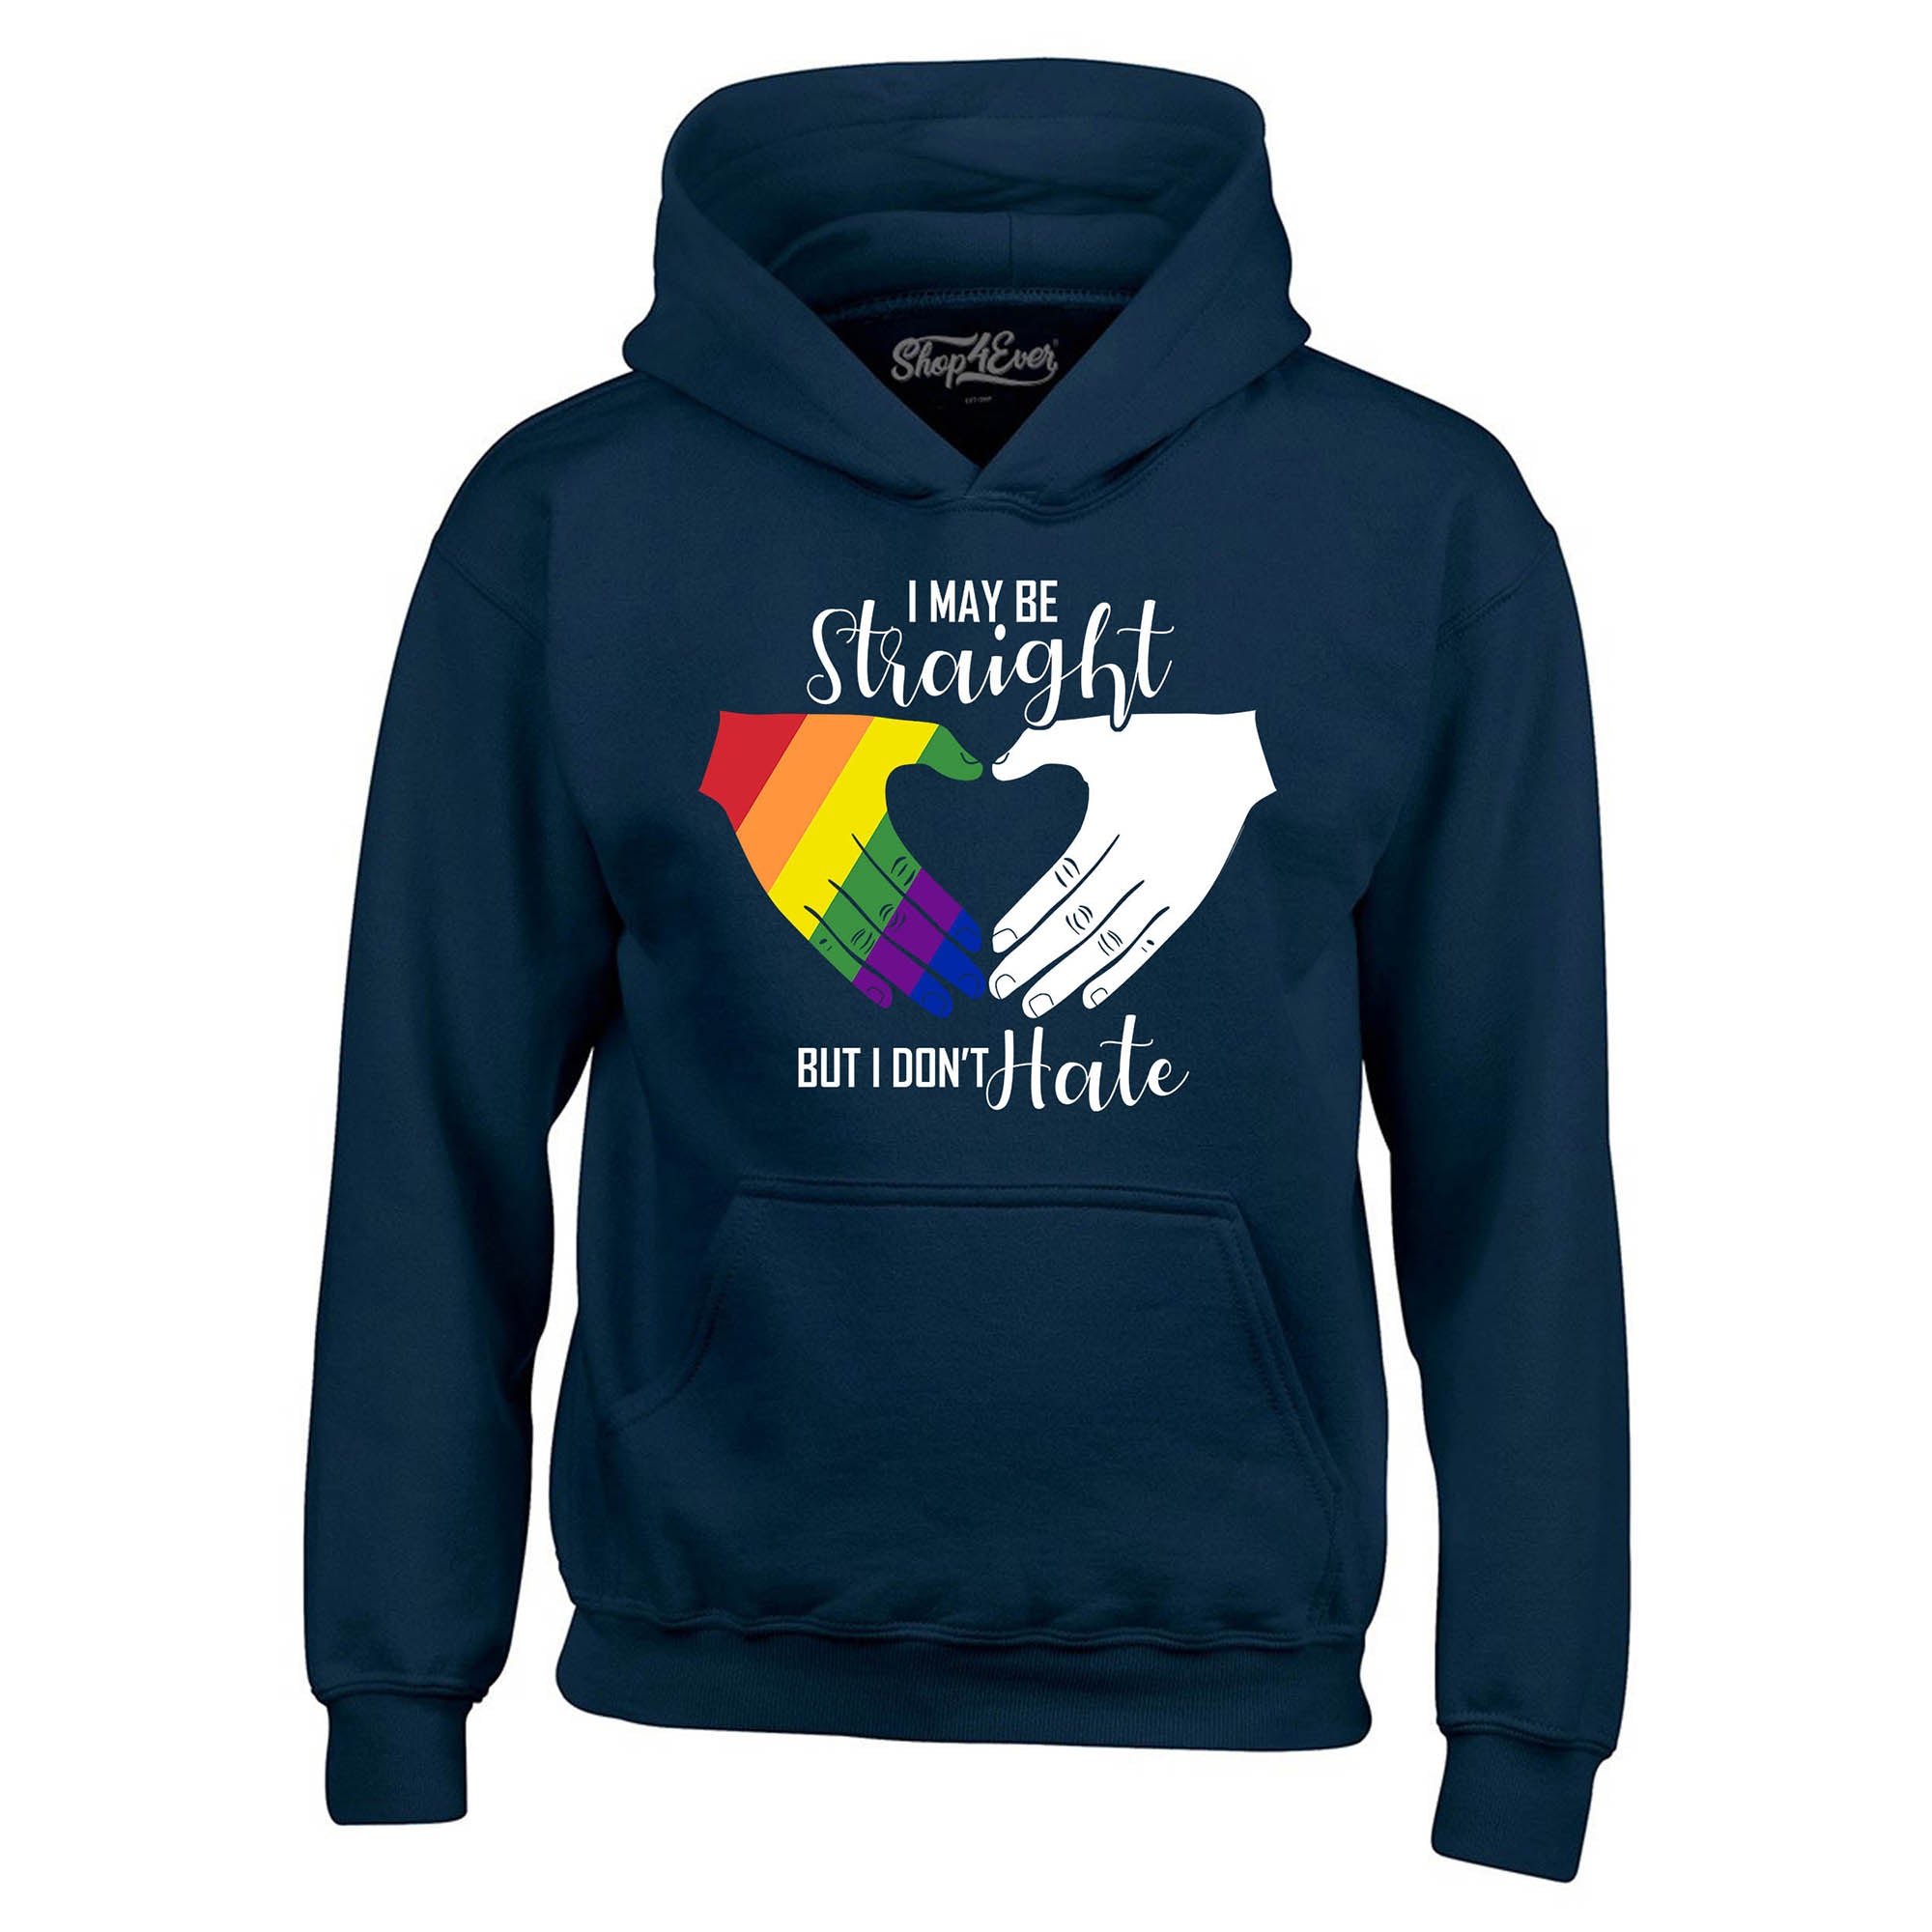 I May Be Straight but I Don't Hate ~ Gay Pride Hoodie Sweatshirts